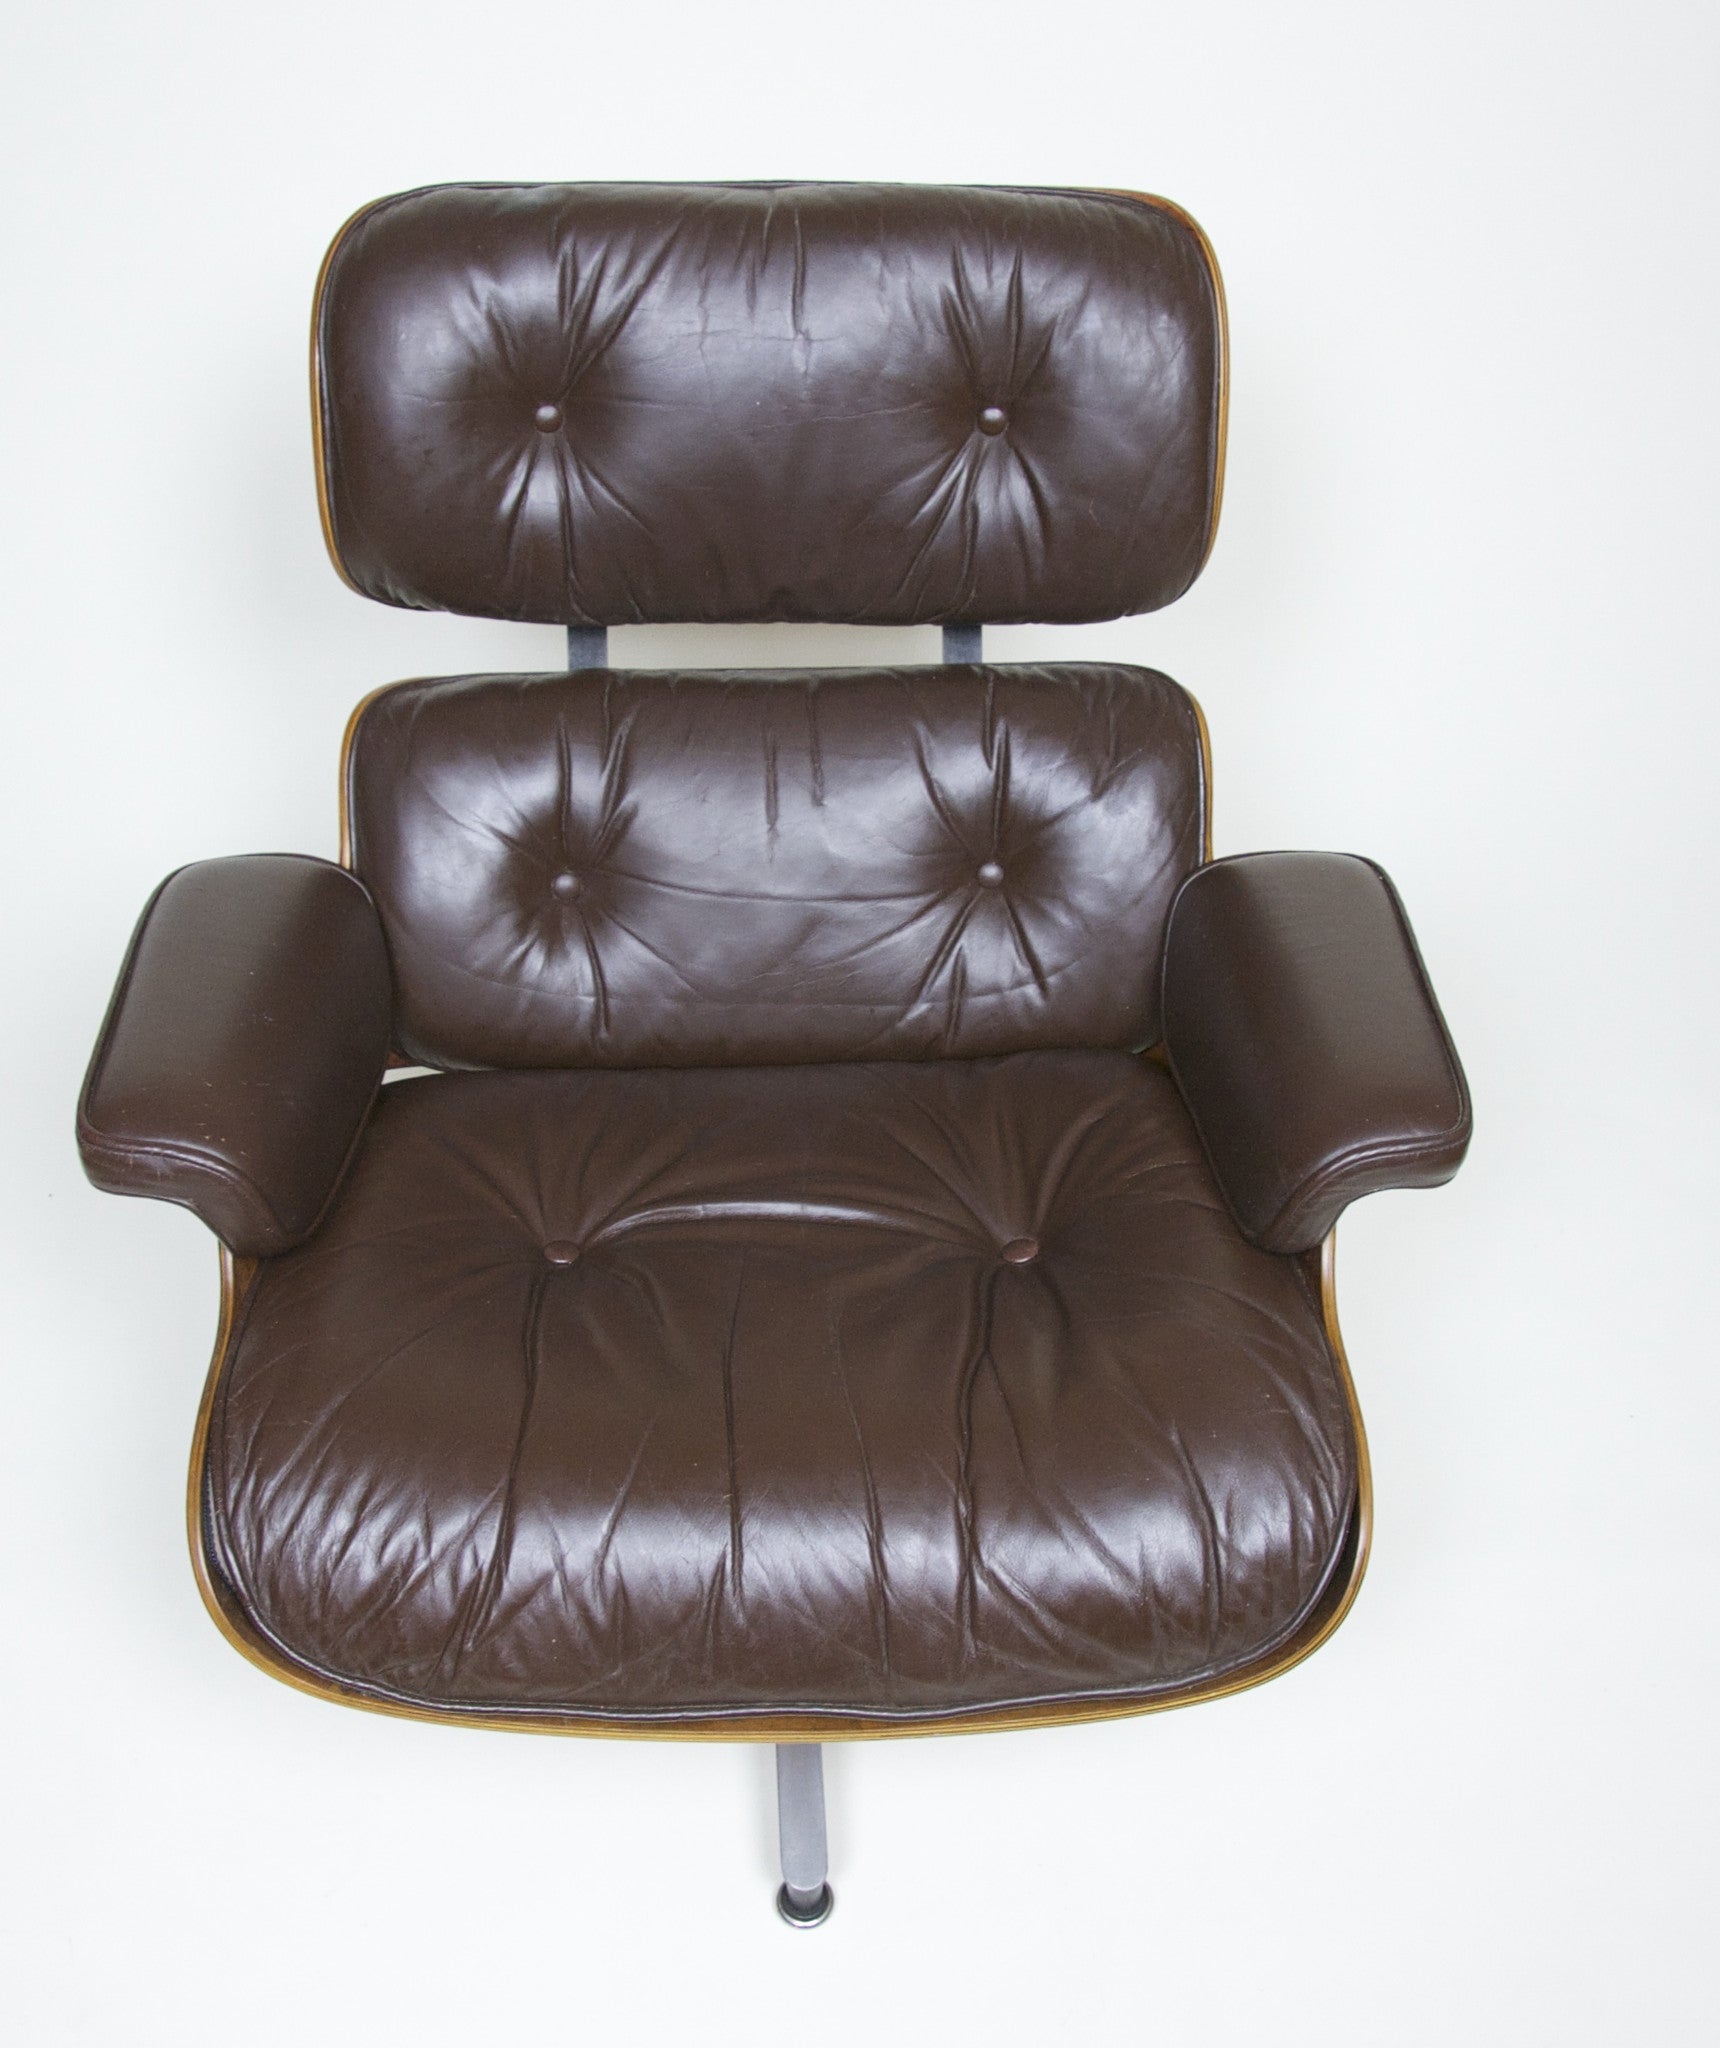 SOLD Brown Eames Lounge Chair With Ottoman with Brazilian Rosewood